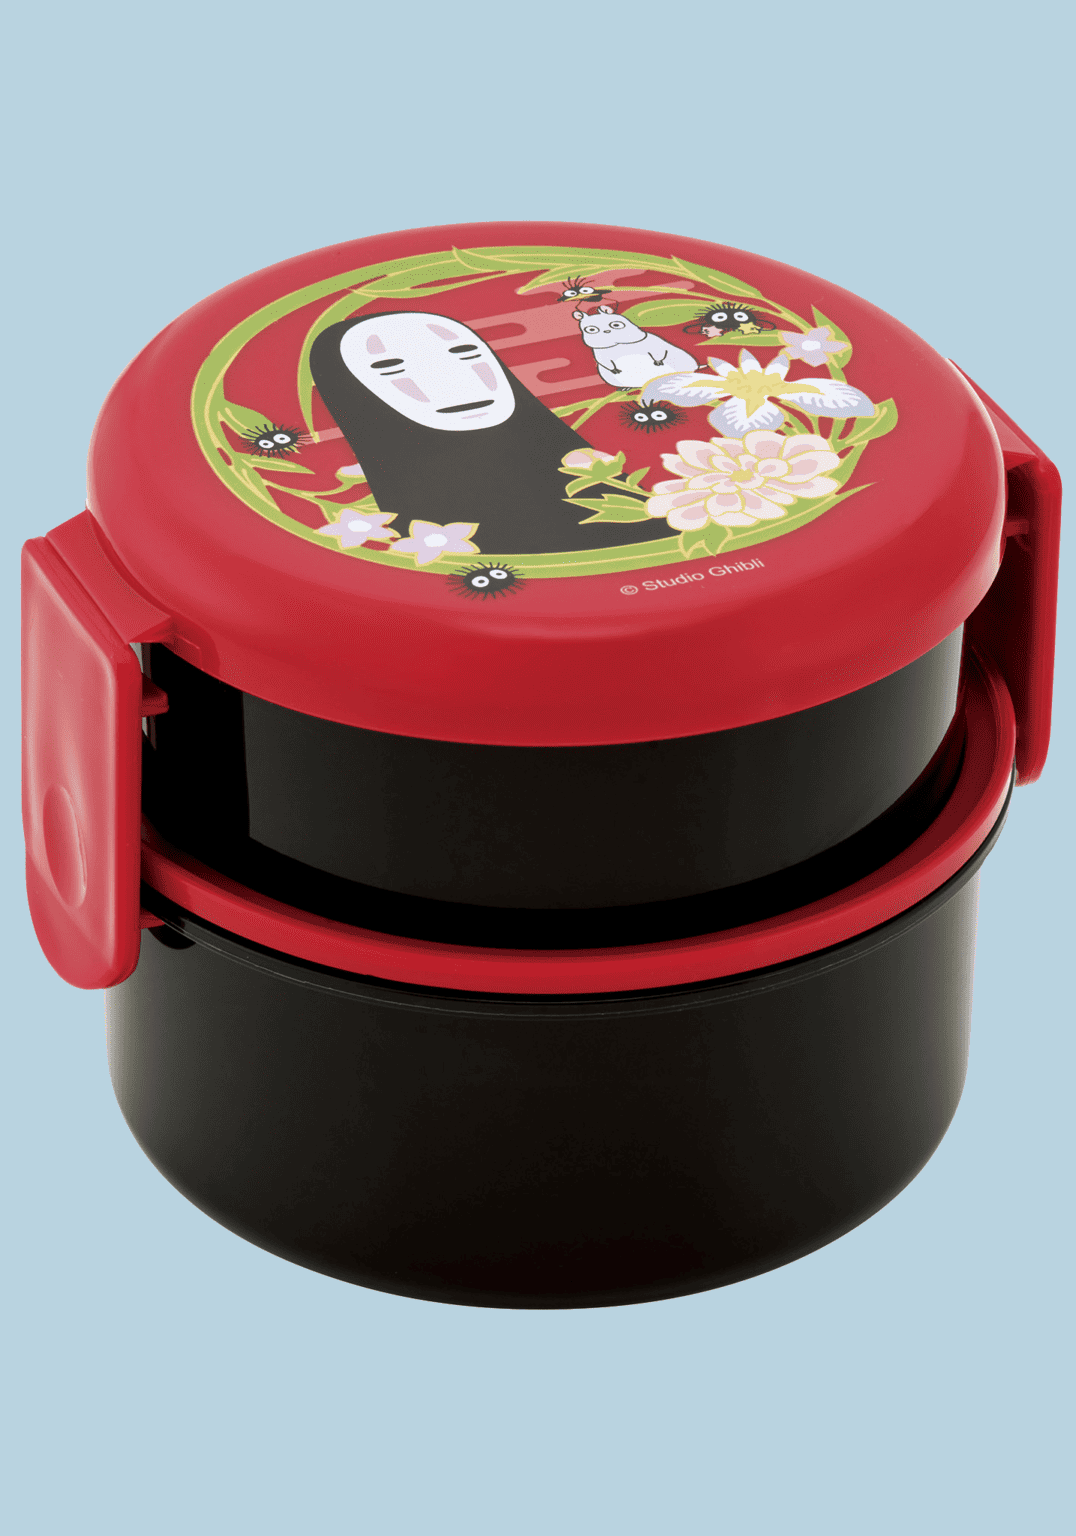 Clever Idiots Spirited Away Dark Red 2-Layered Round Bento Lunch Box with Fork Kawaii Gifts 4973307645174